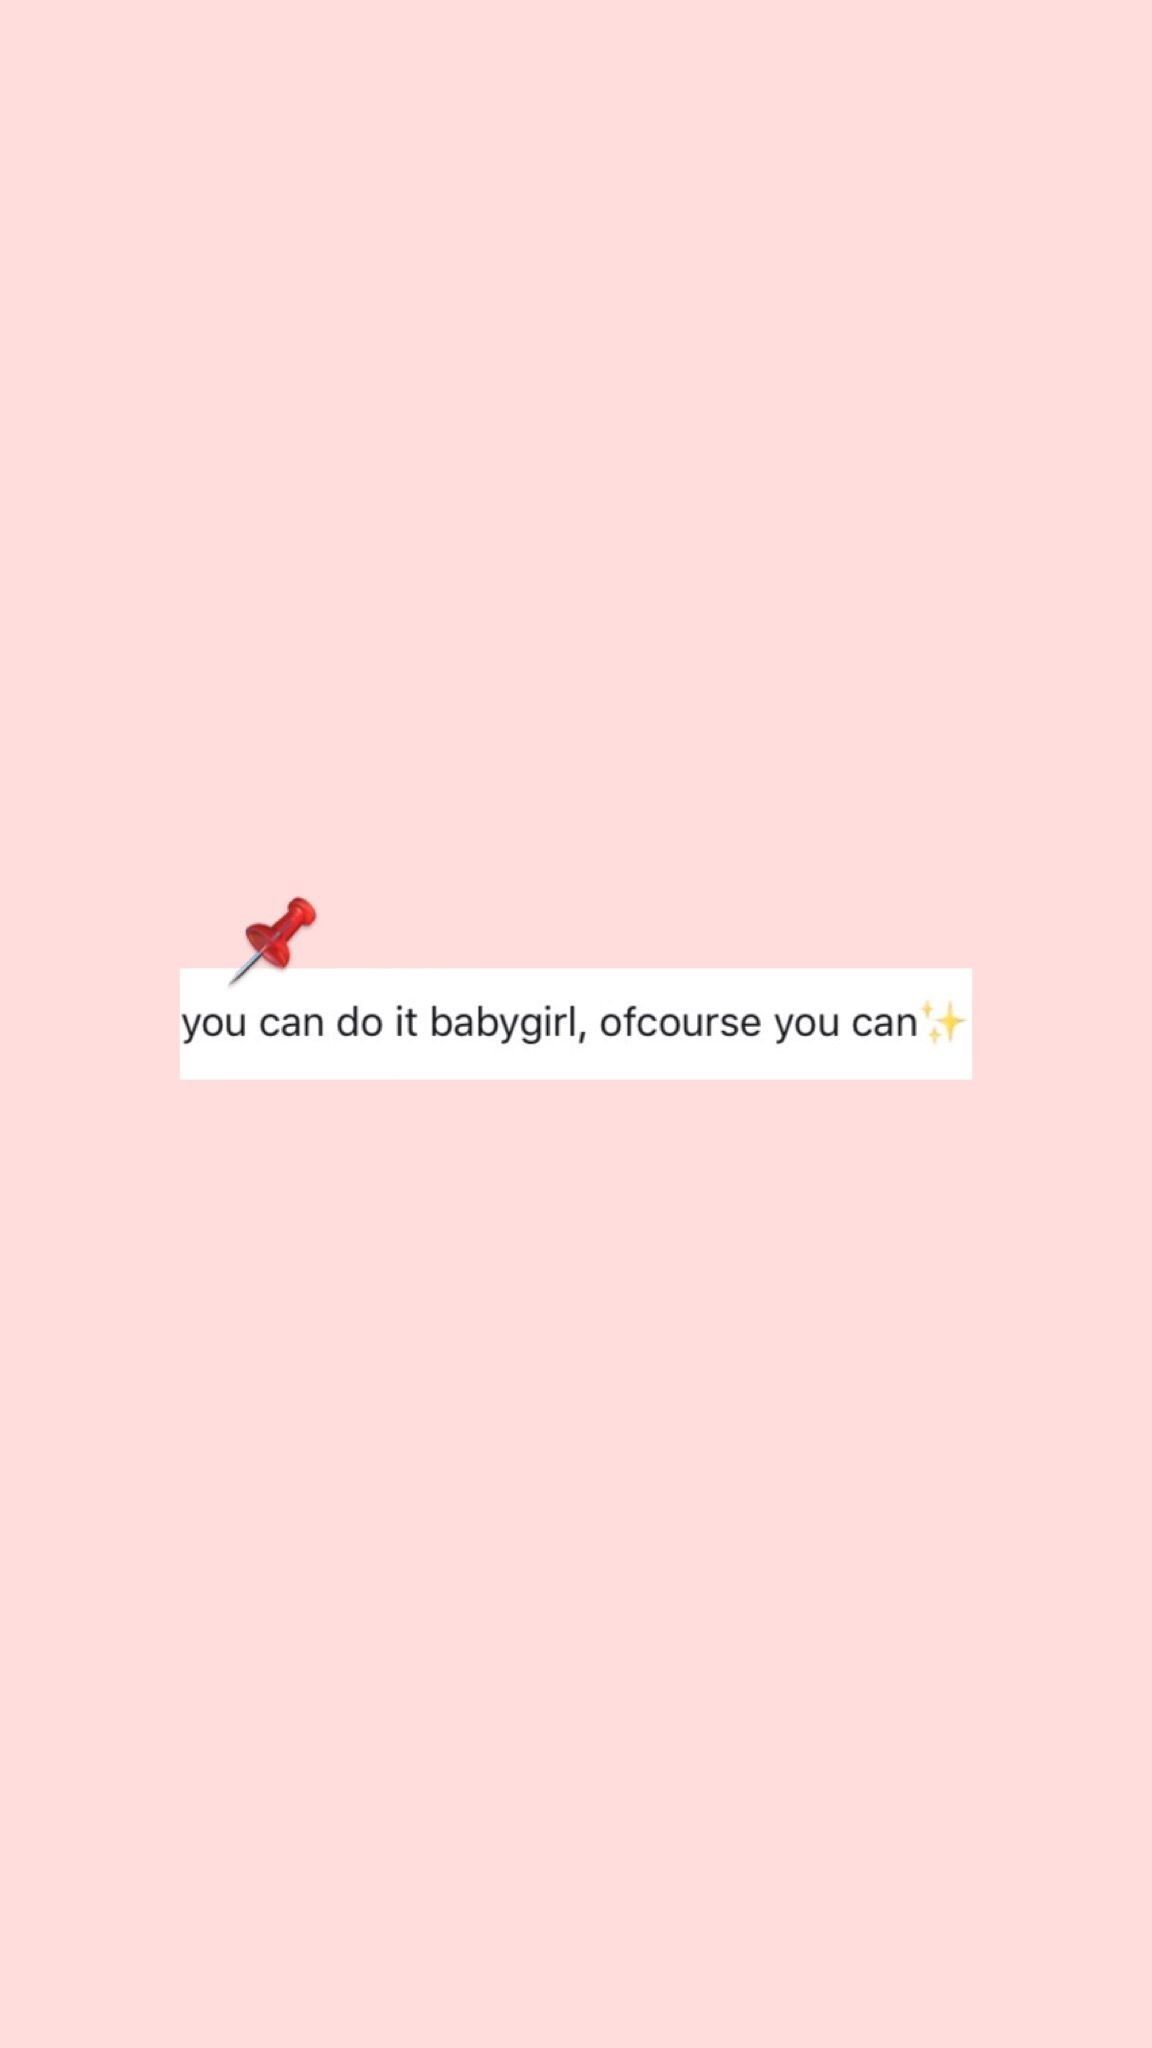 You can do it babygirl. Of course you can. Quoting. Wallpaper quotes, Inspirational quotes, Cute quotes